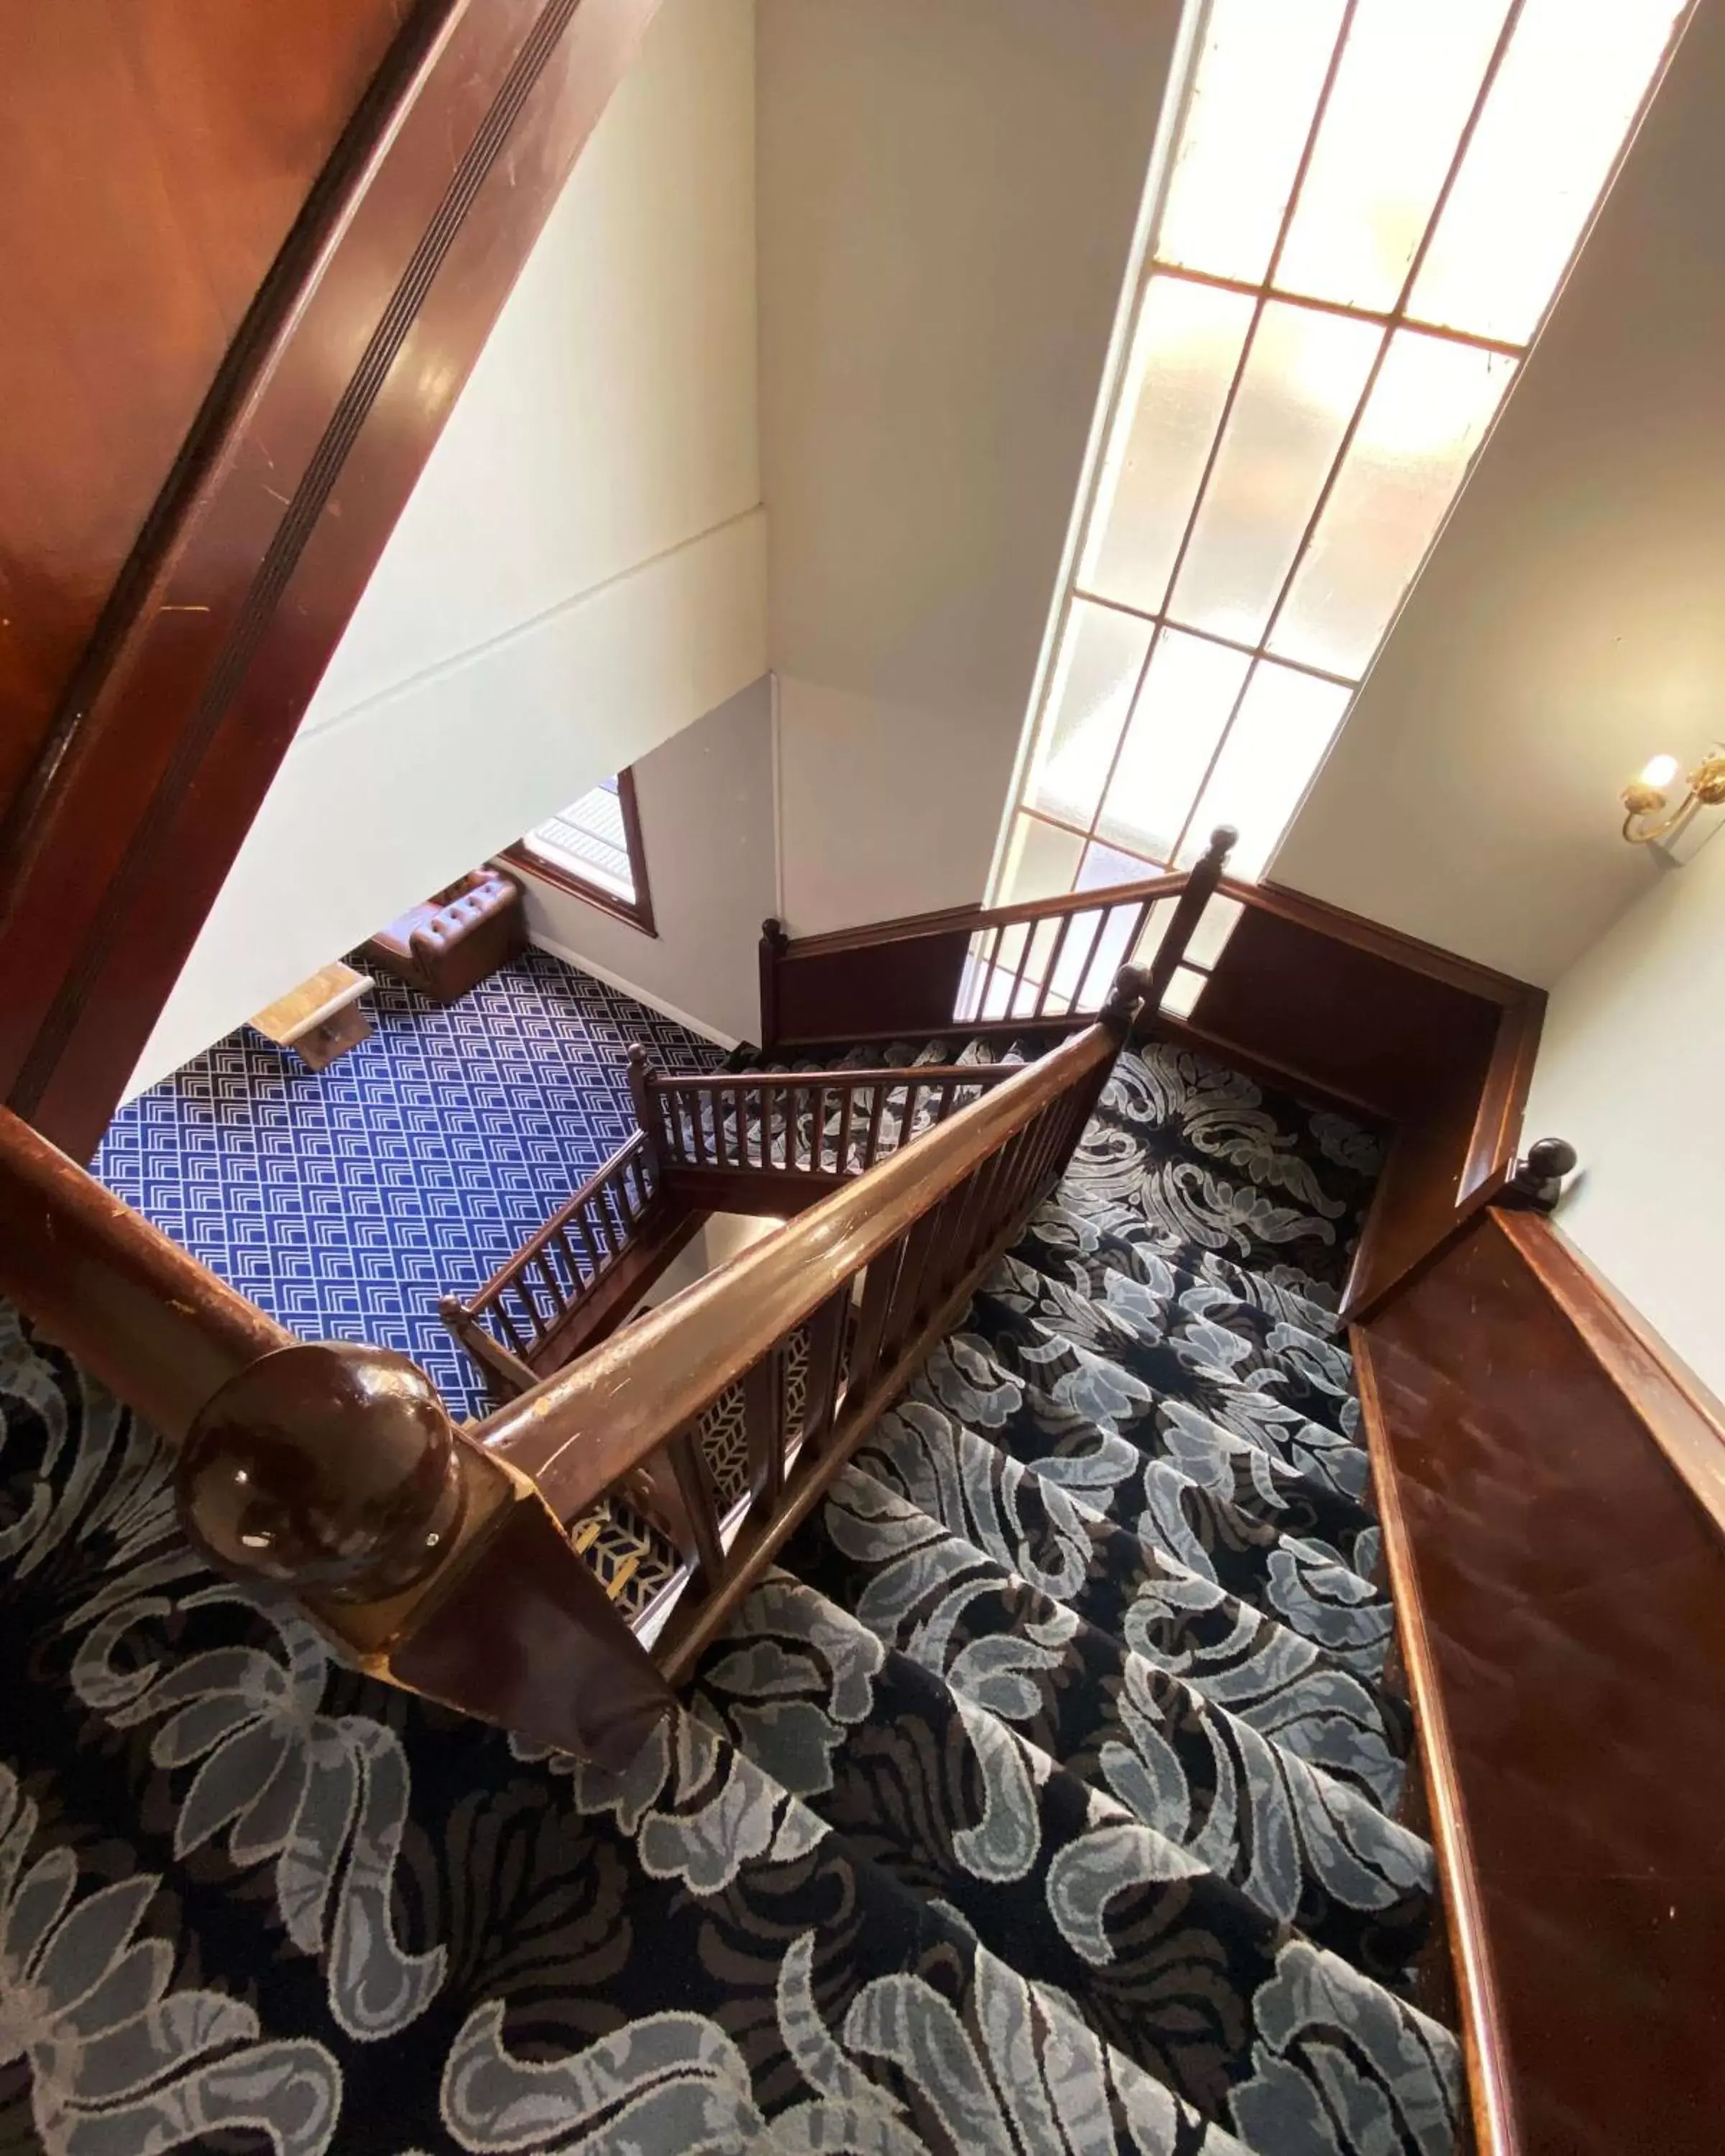 Property building, Bed in Romano's Hotel & Suites Wagga Wagga